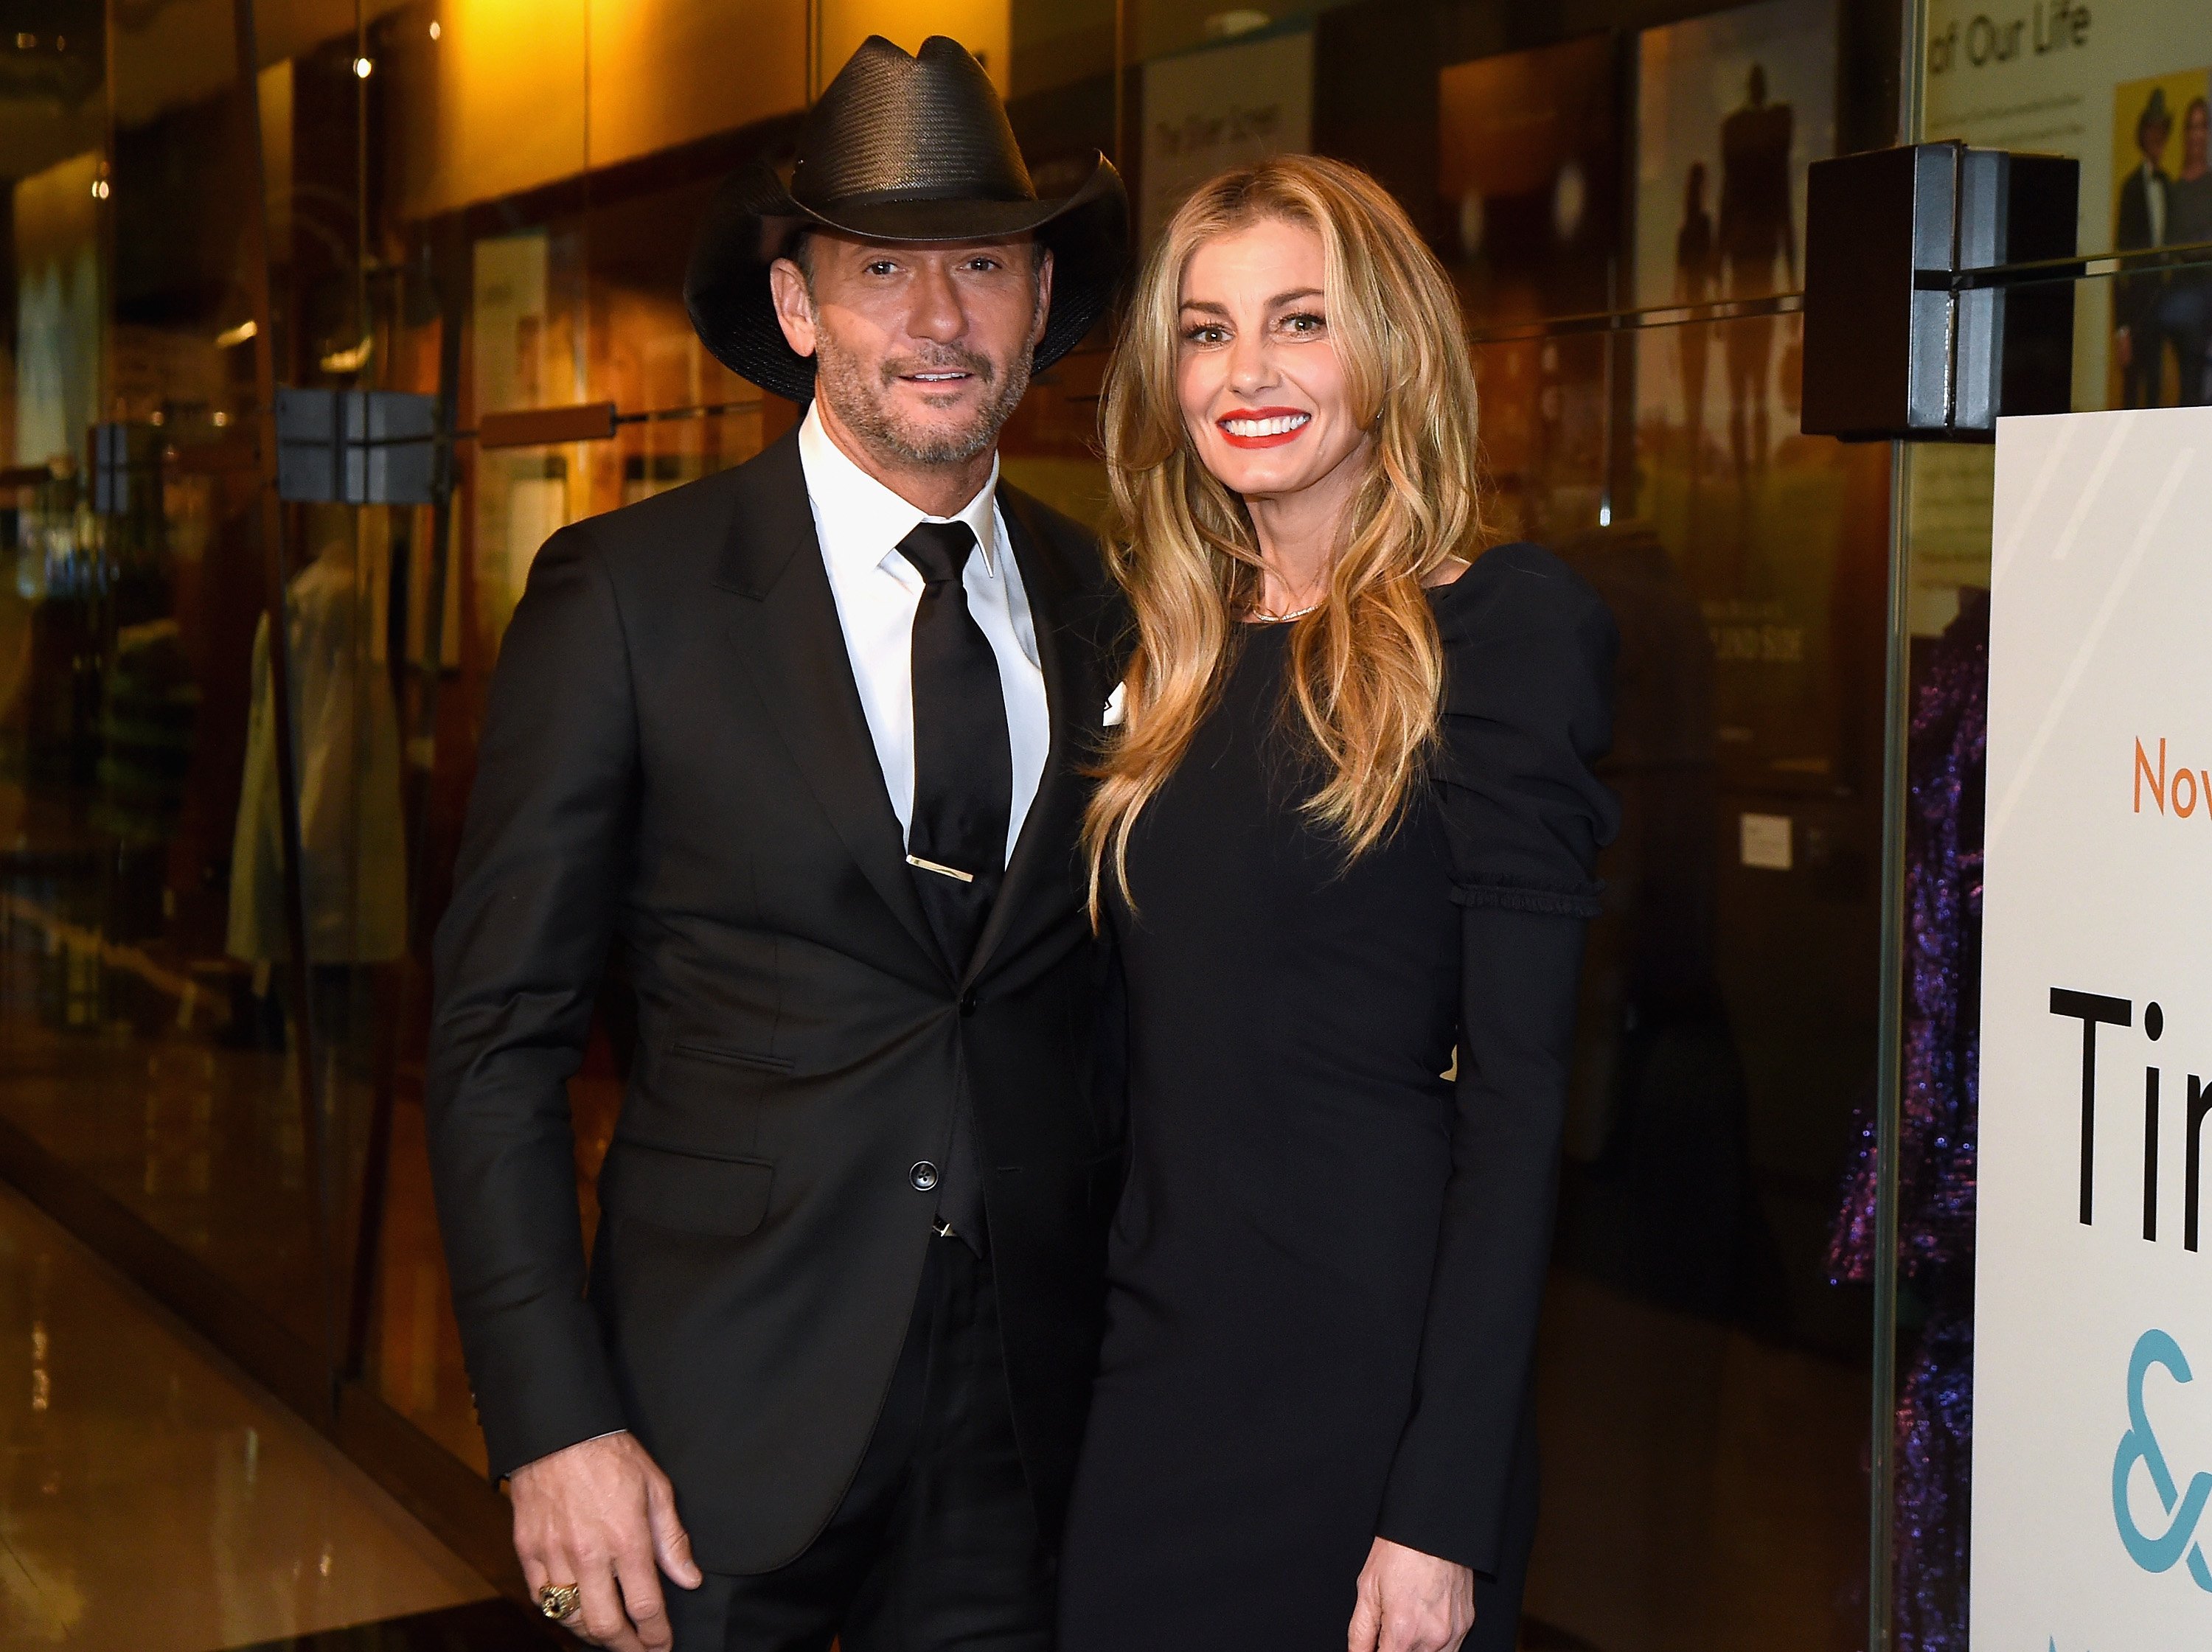 Tim McGraw and Faith Hill attend the Country Music Hall of Fame and Museum's debut of the Tim McGraw and Faith Hill Exhibition on November 15, 2017 in Nashville, Tennessee | Photo: Getty Images